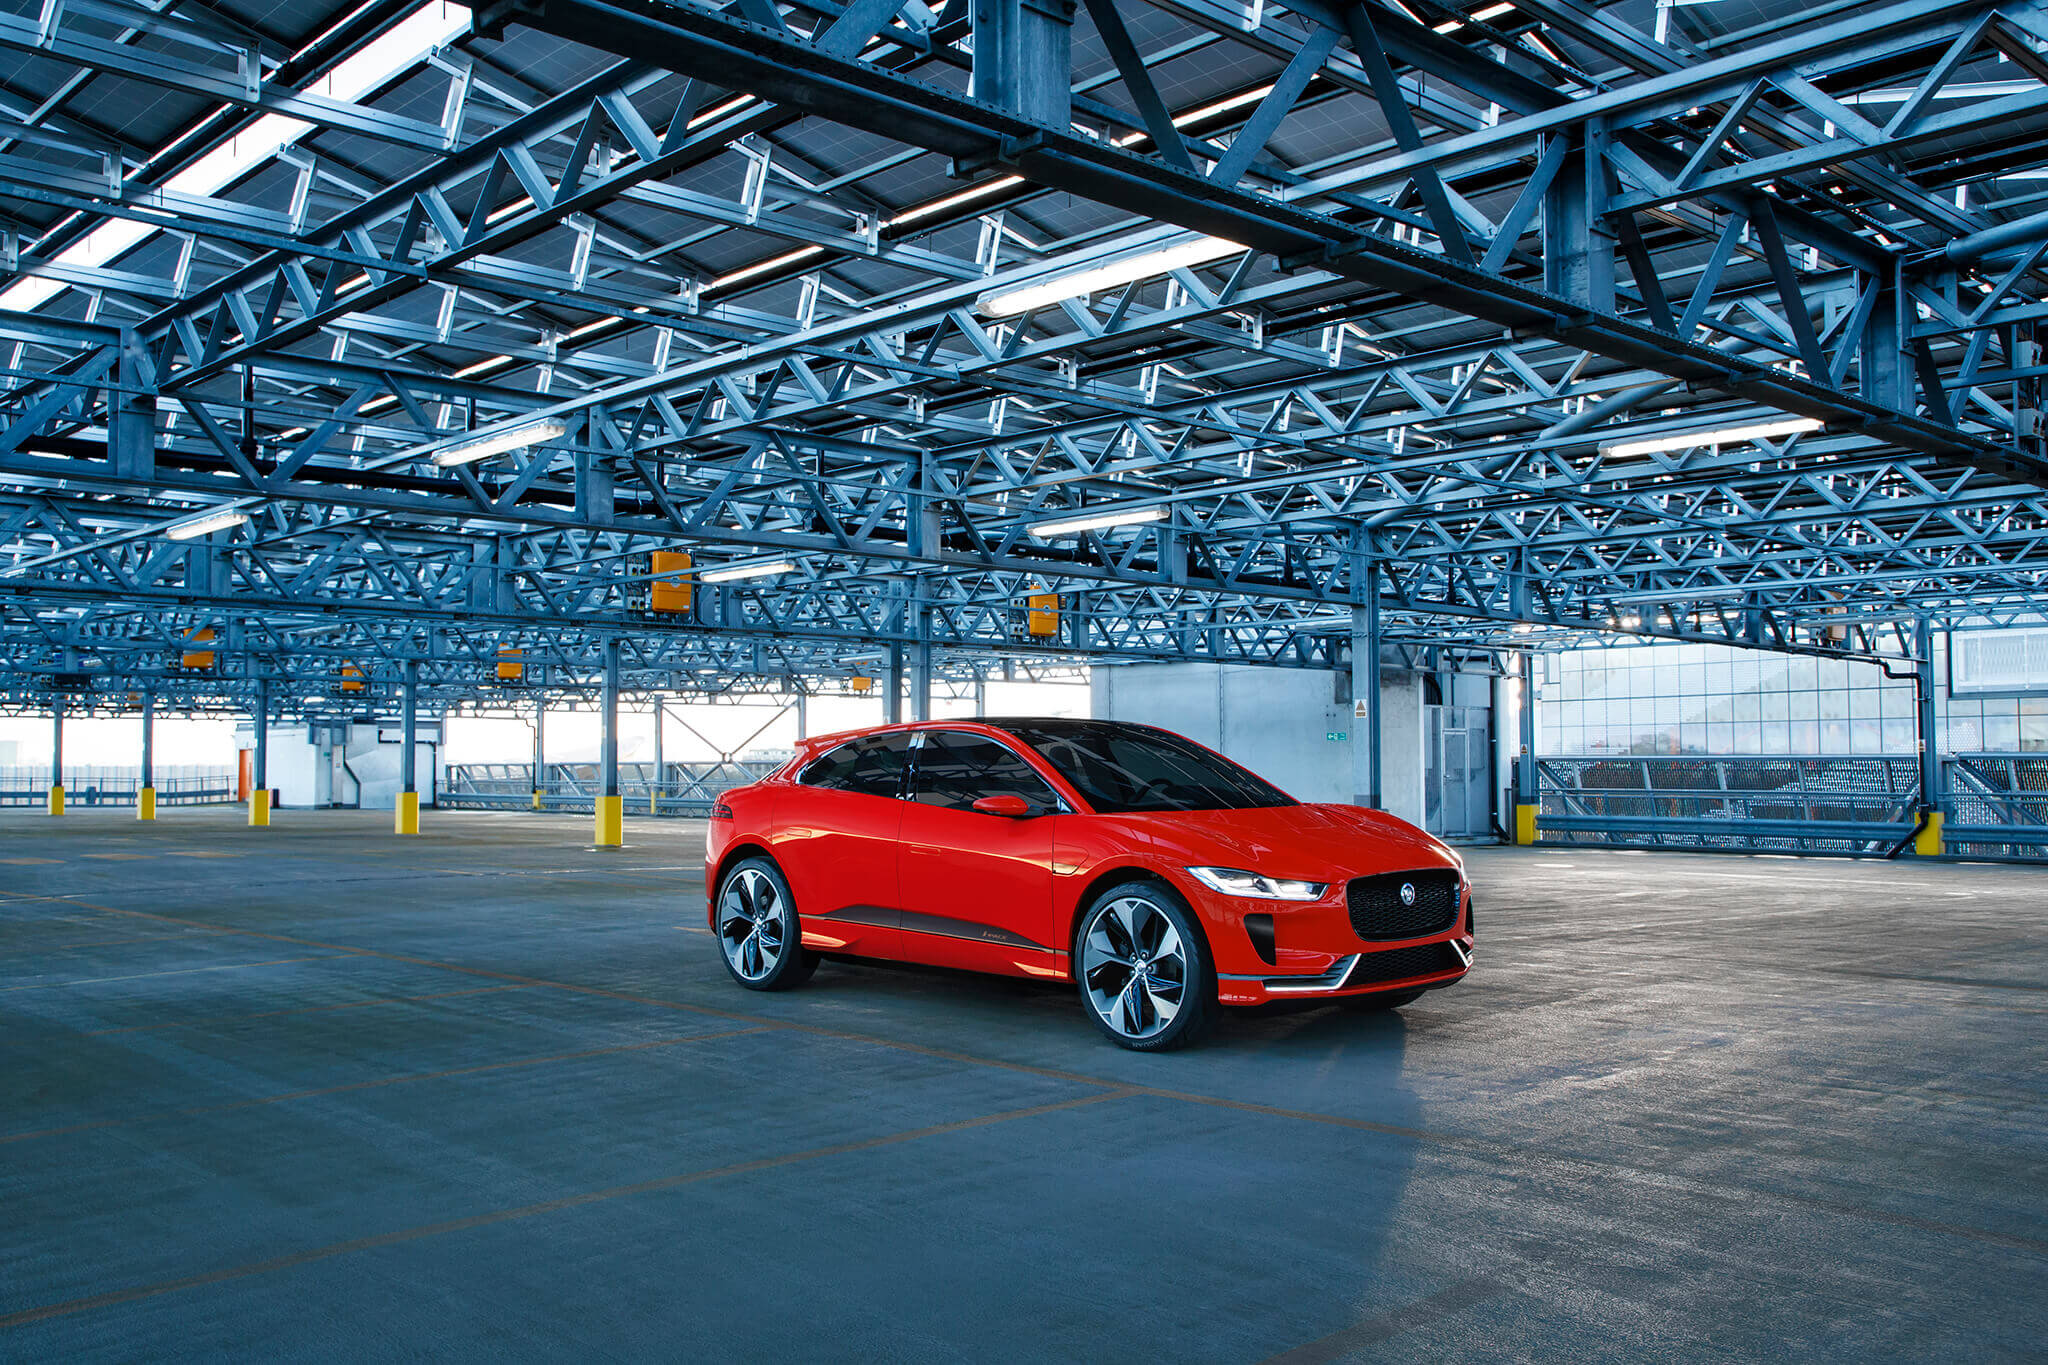 JLR commits to electrification of all models launched from 2020